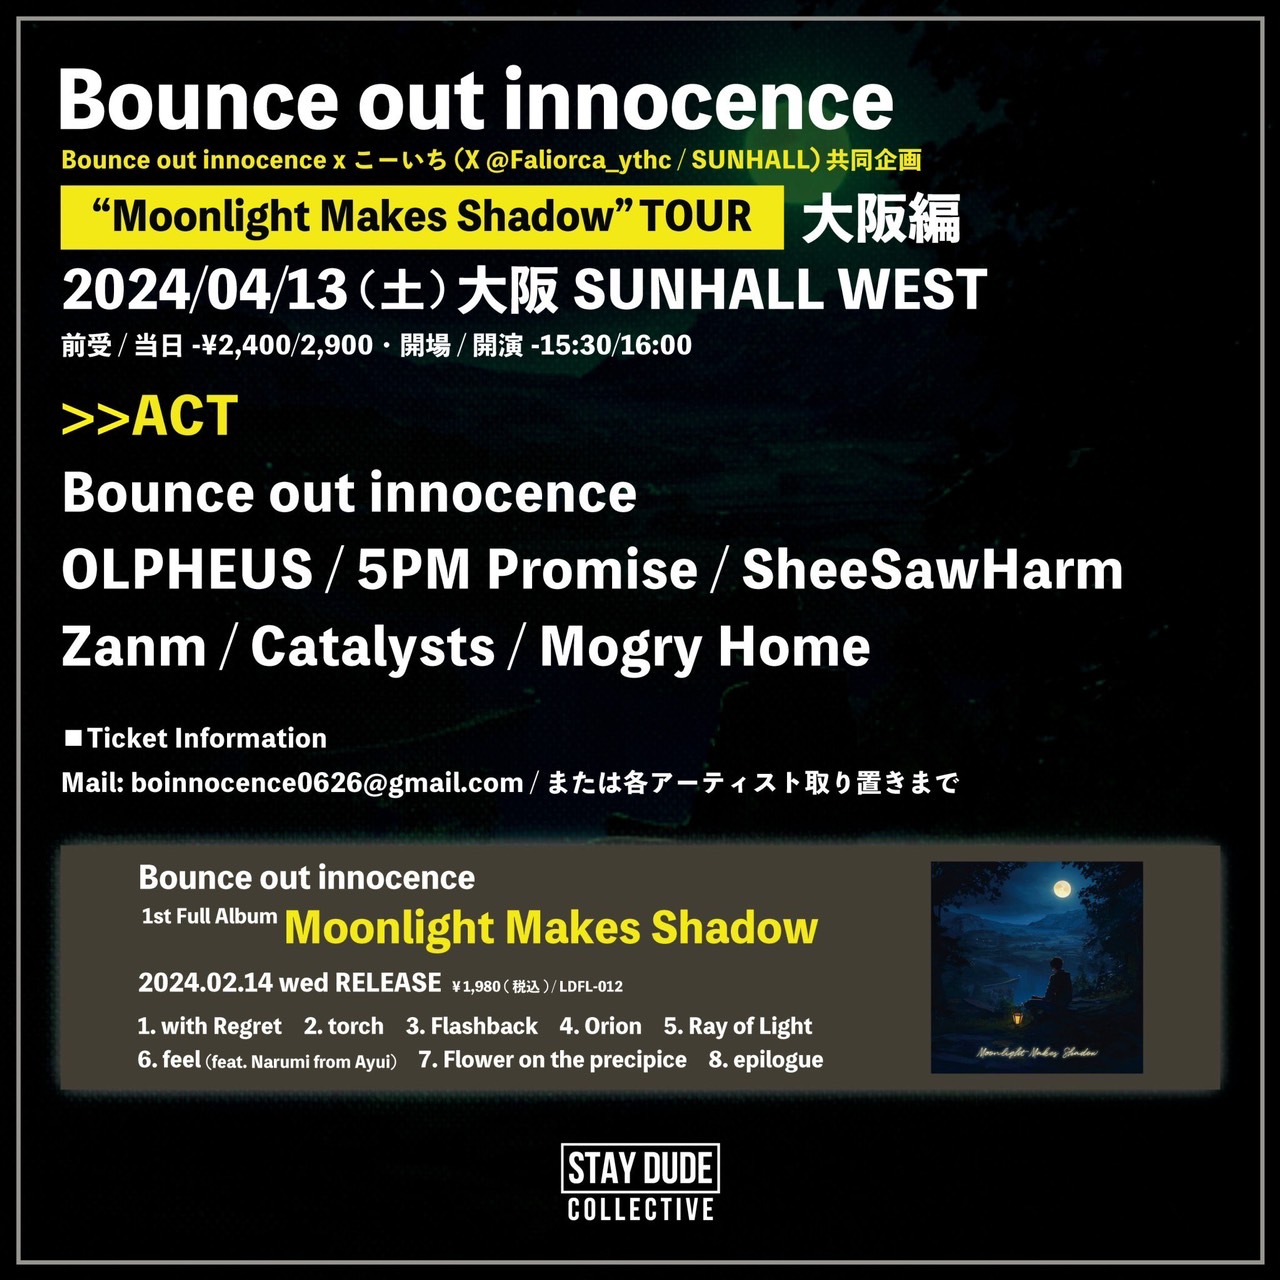 Bounce out innocence “Moonlight Makes Shadow” TOUR